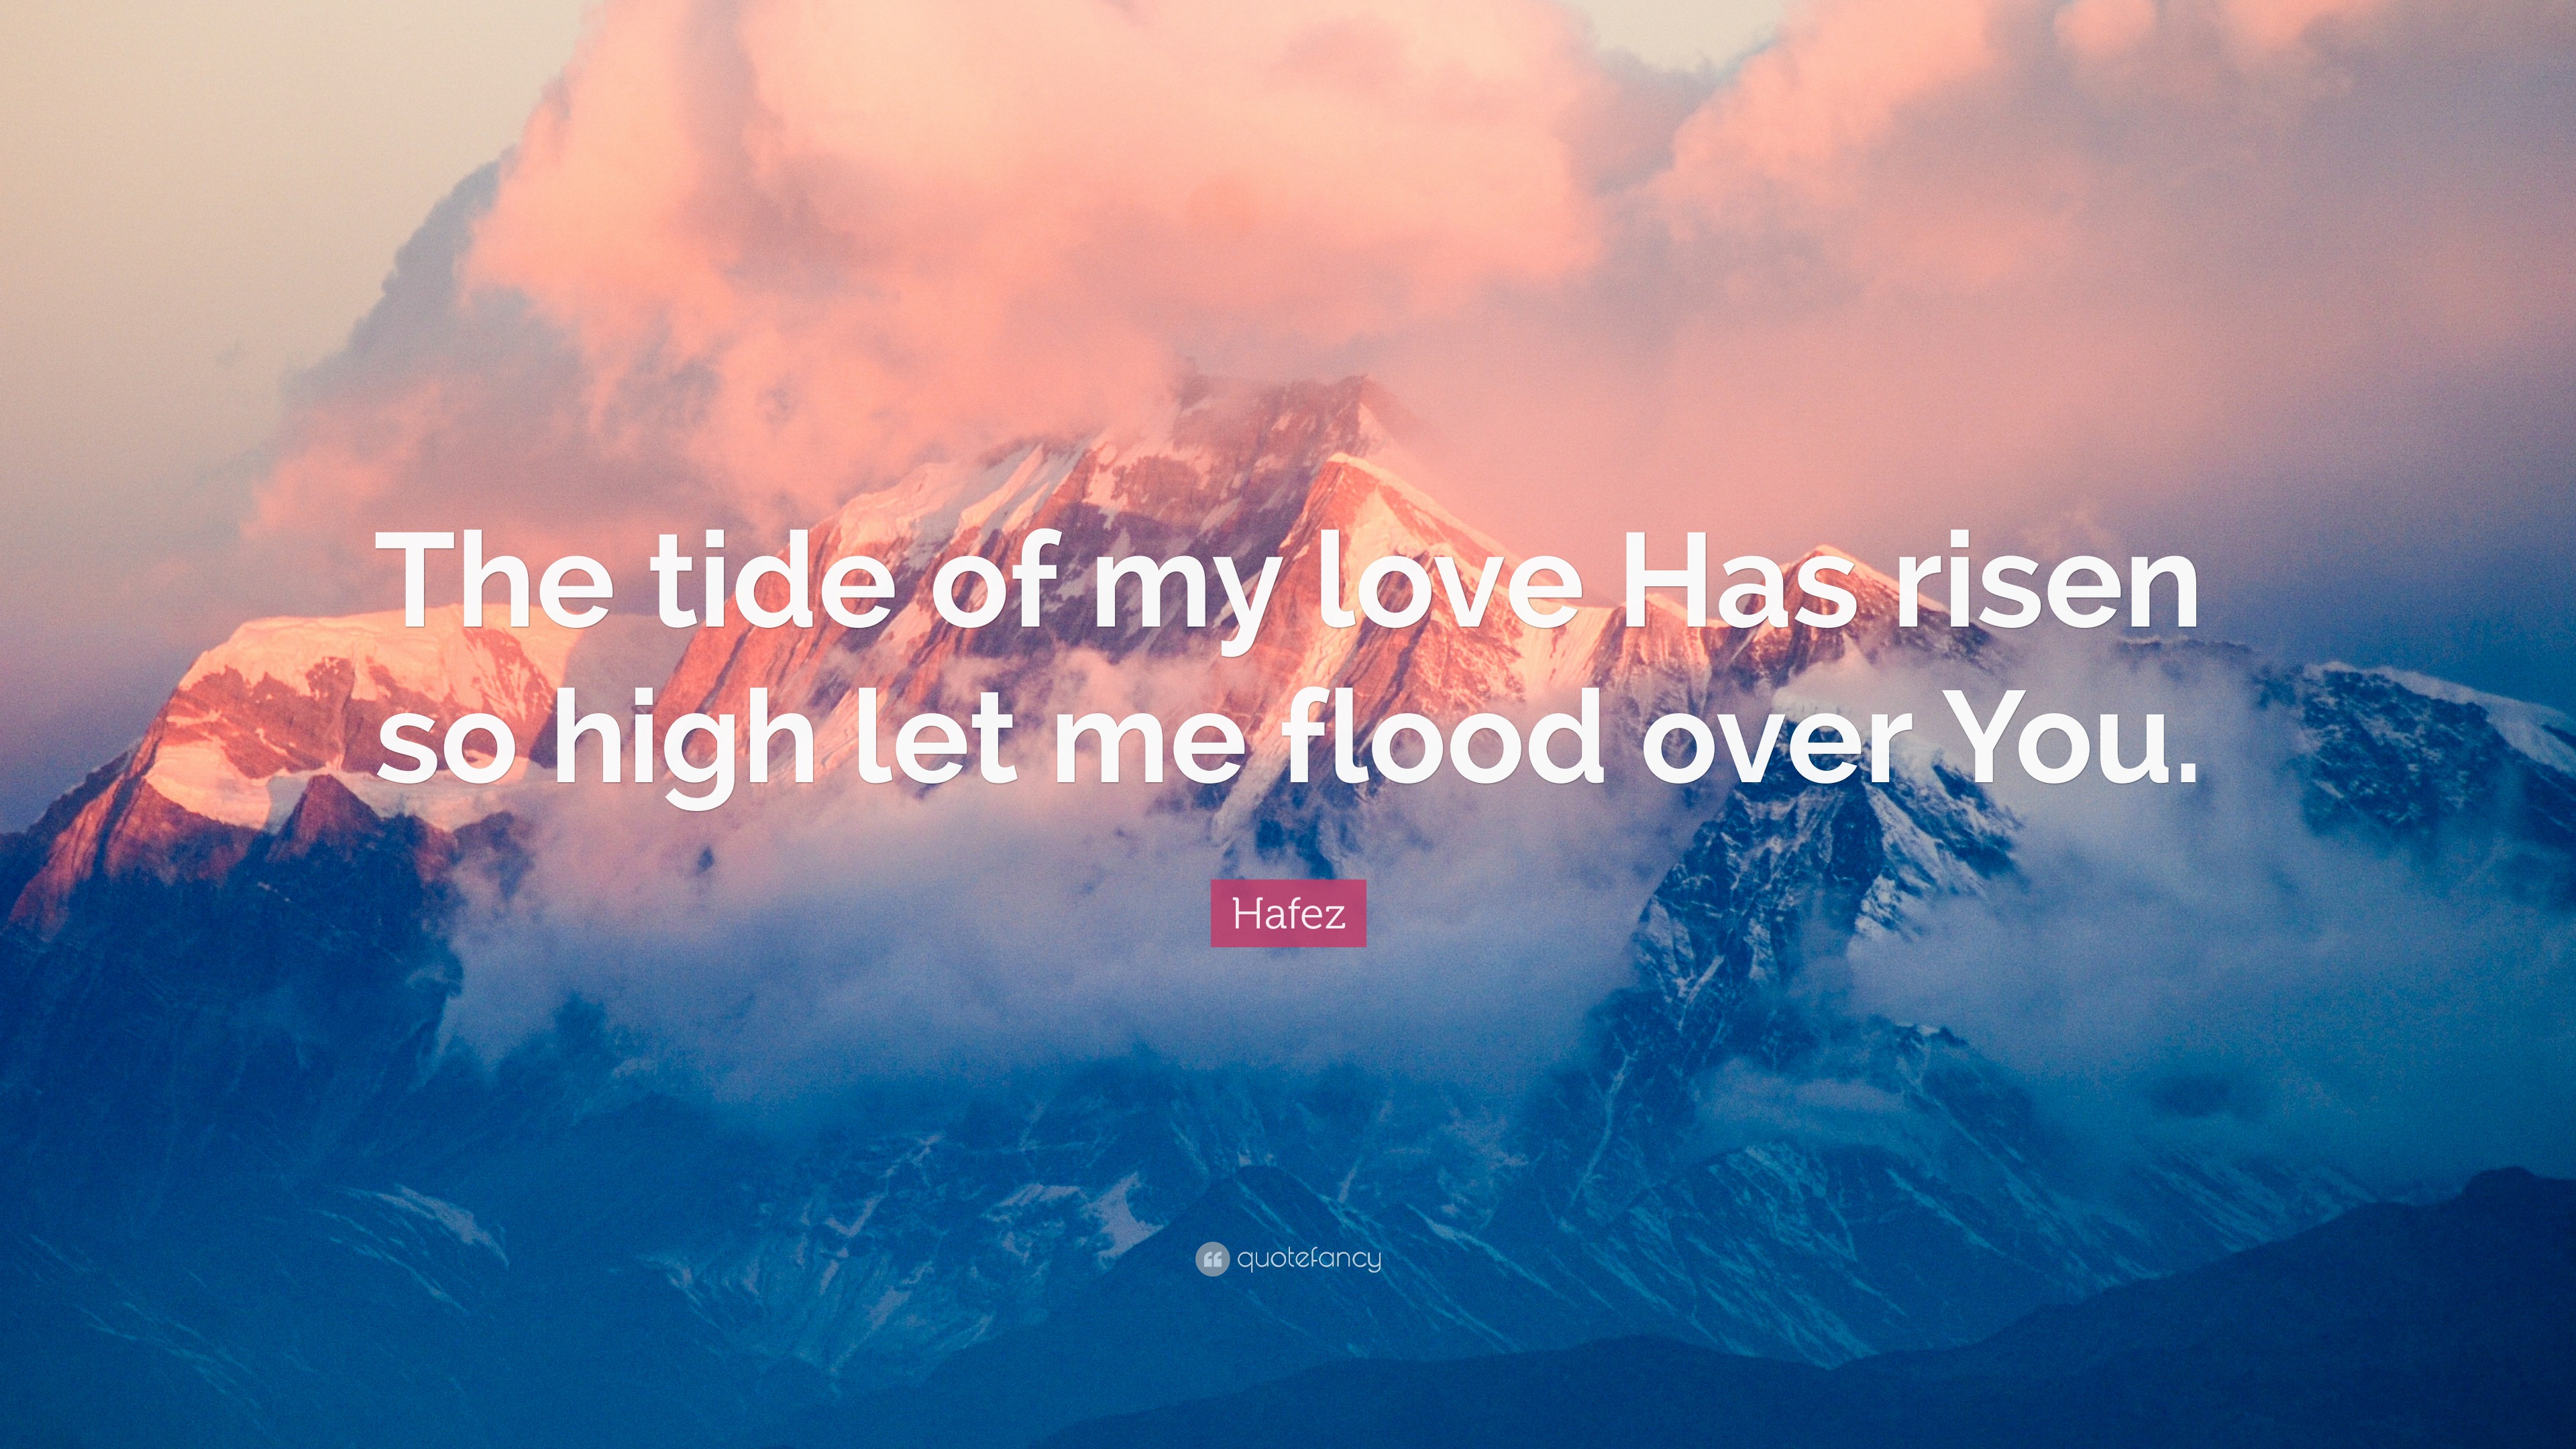 Your love is high like the tide and pull me in